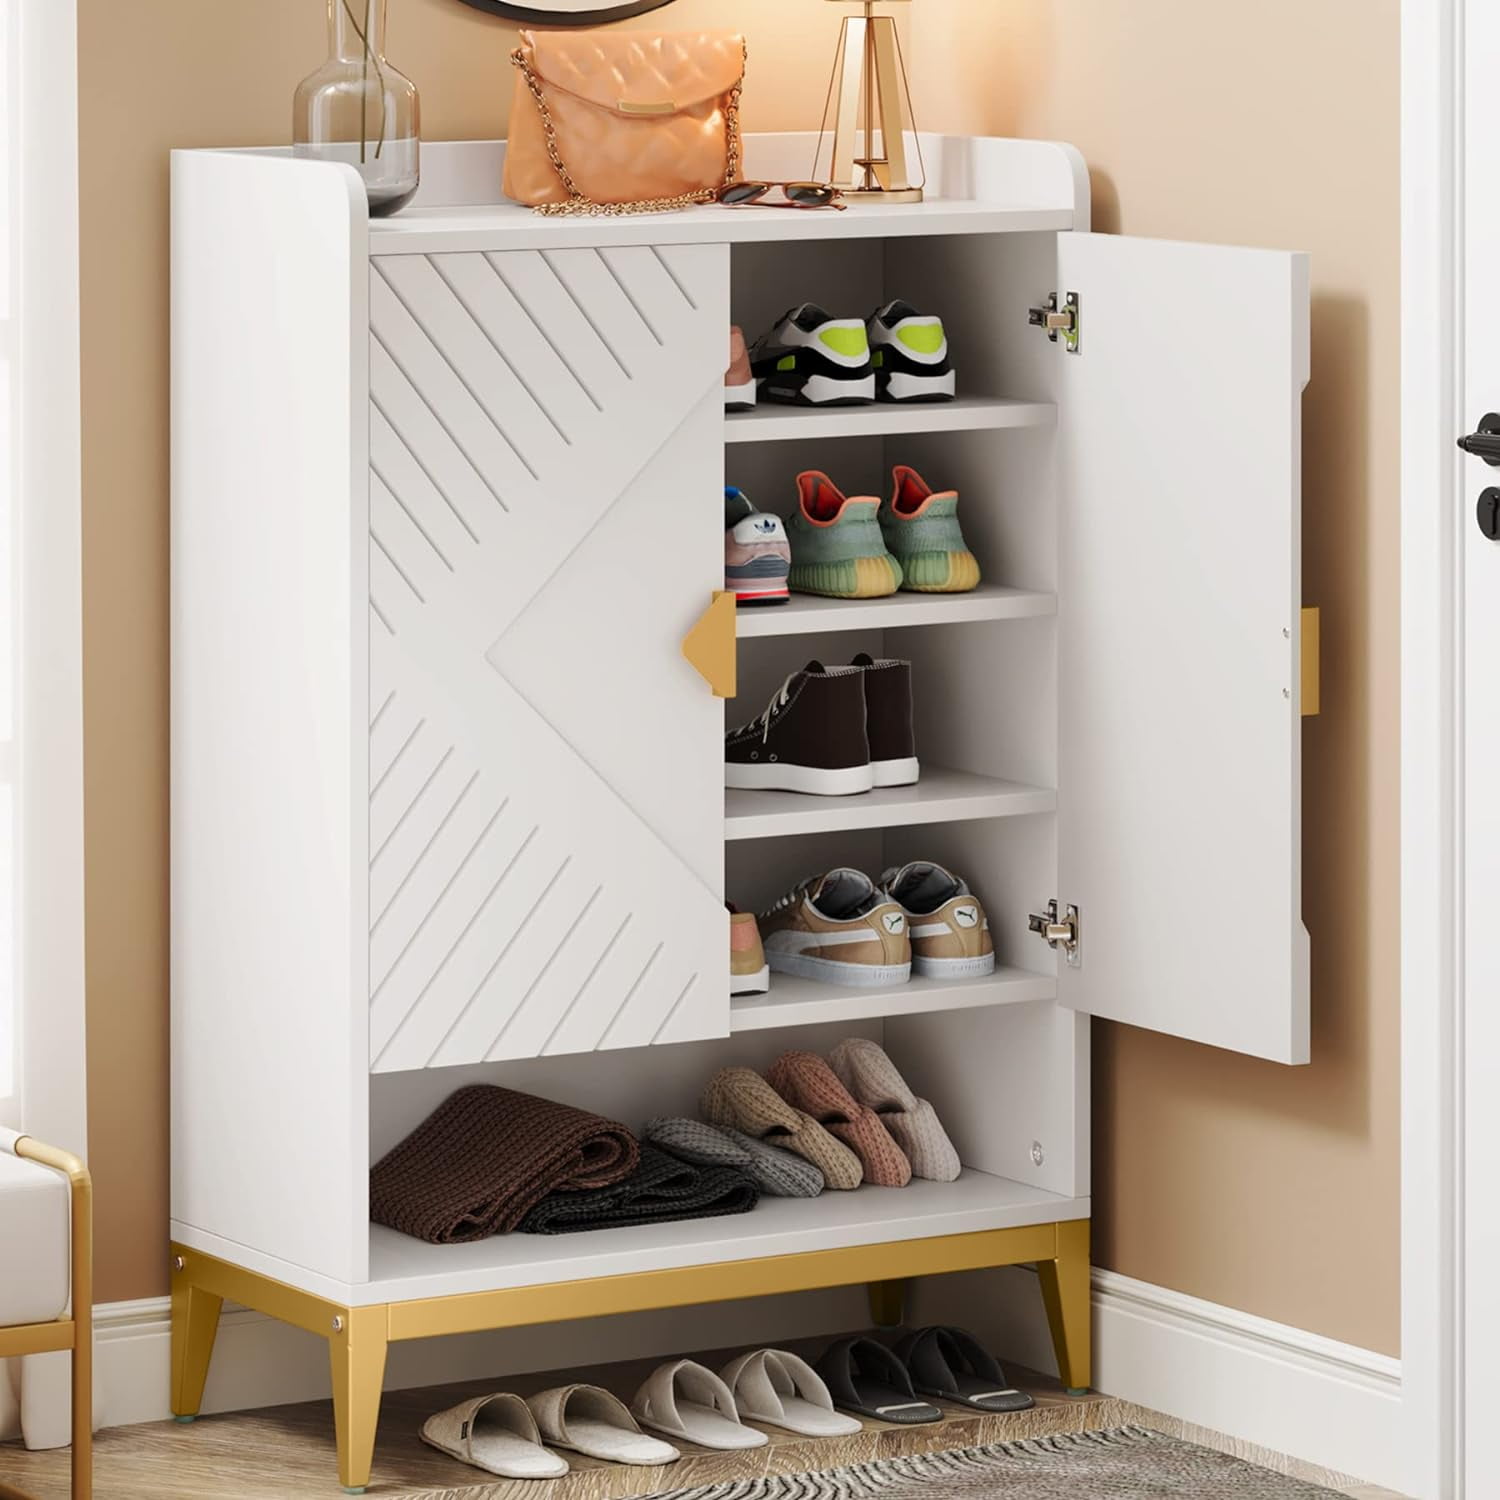 30 Pair Shoe Storage Cabinet Three Cabinet Doors Conceal Ten Total She <div  class=aod_buynow></div>– Inhomelivings